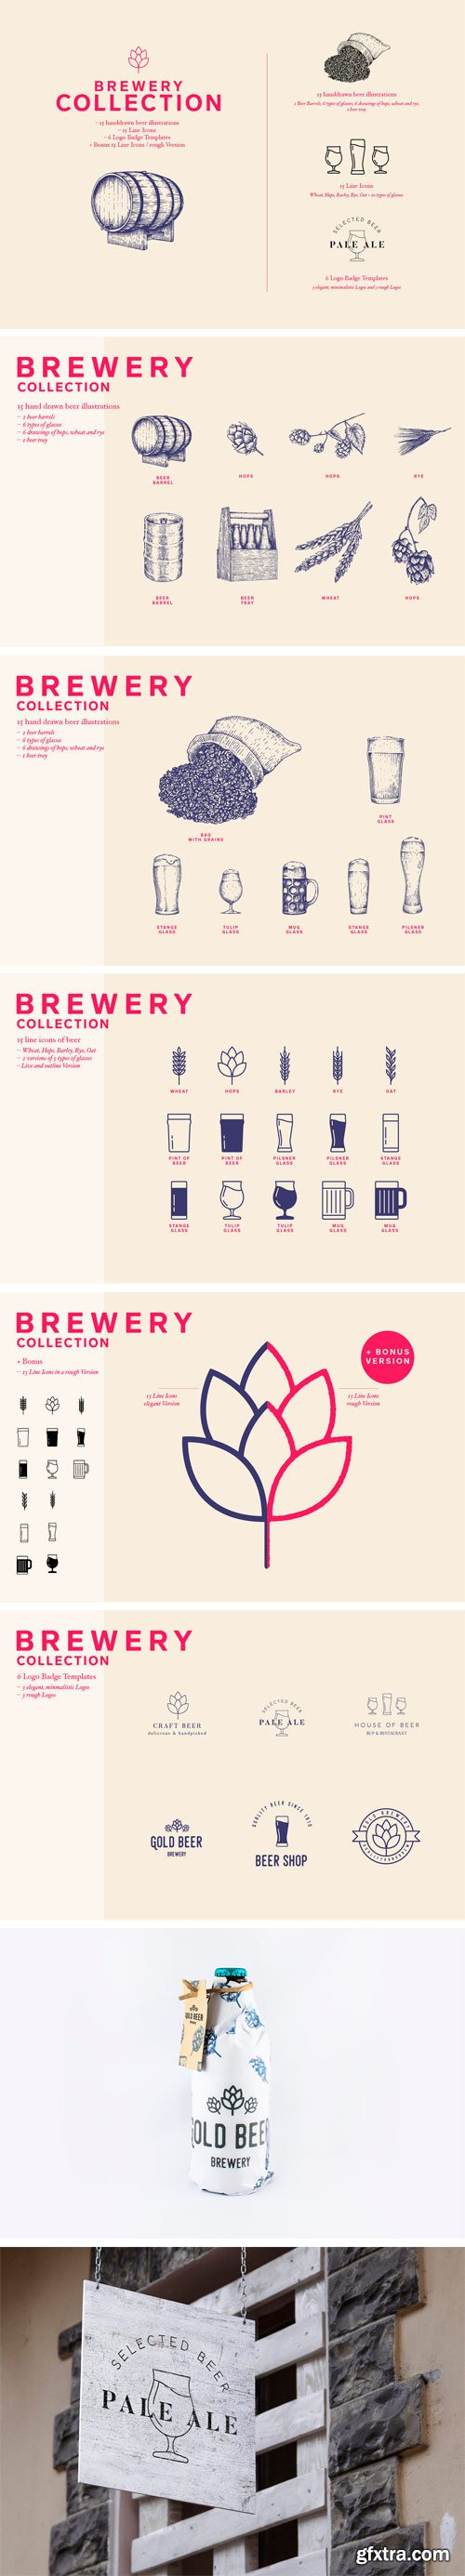 CM - The Beer Collection 2271224